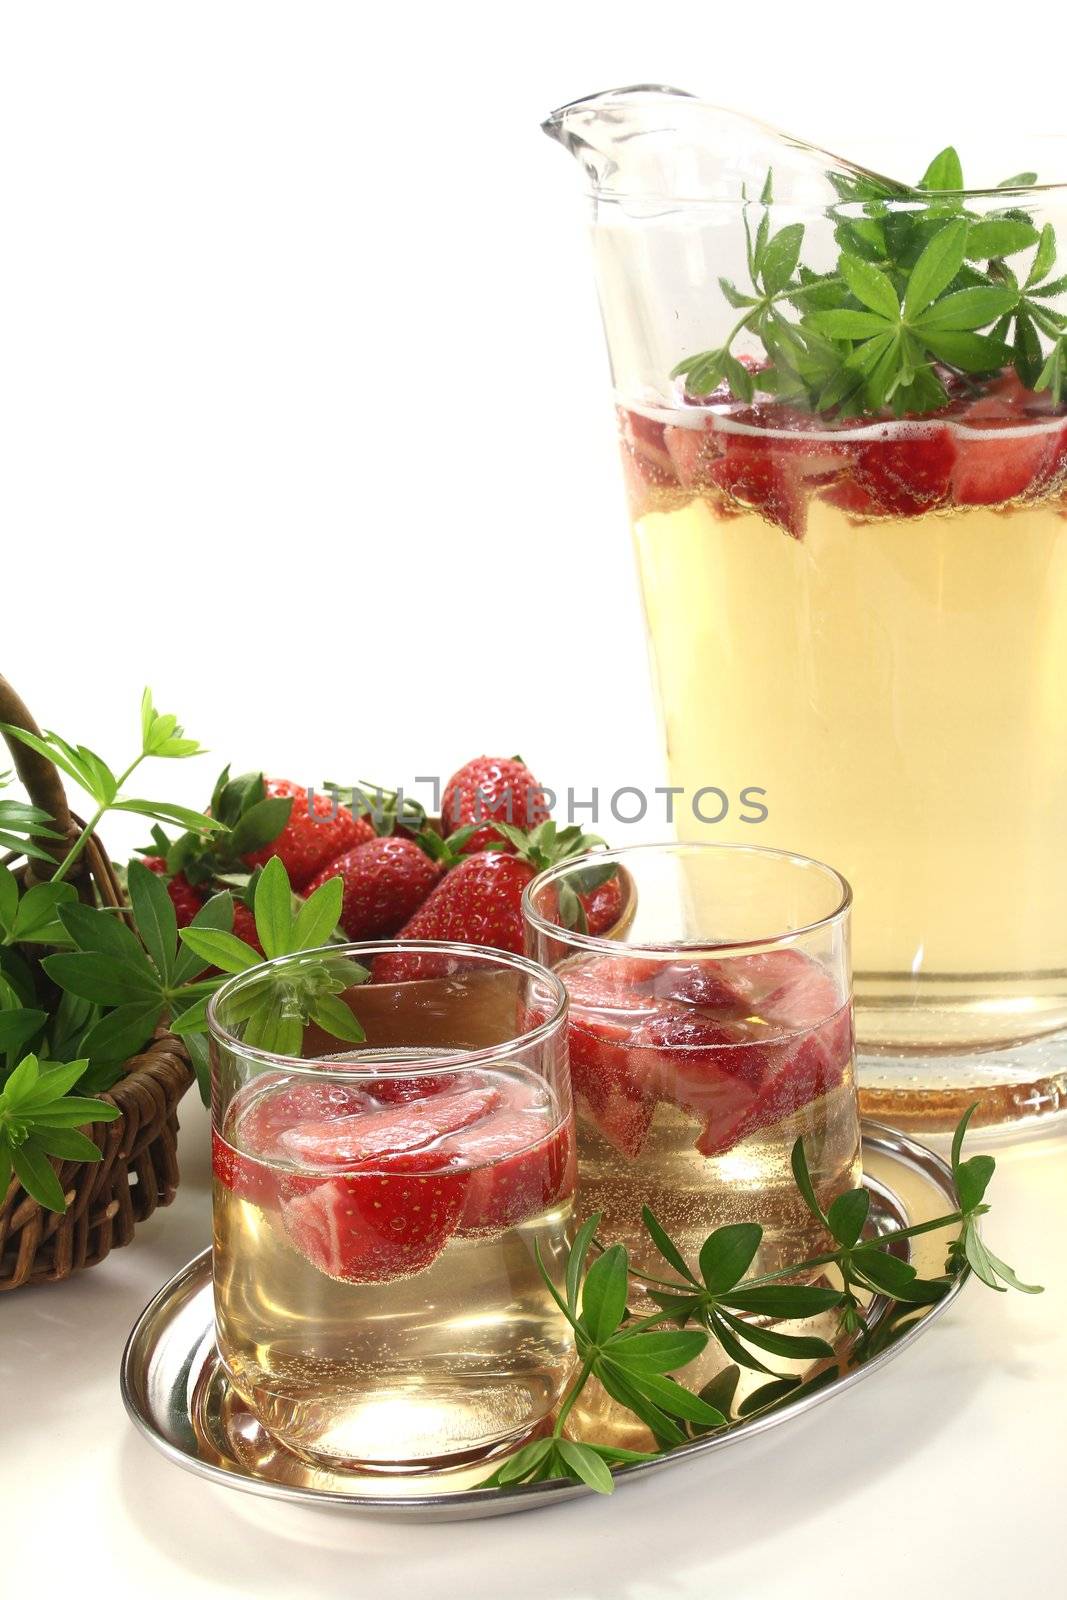 May wine with strawberries and woodruff by discovery